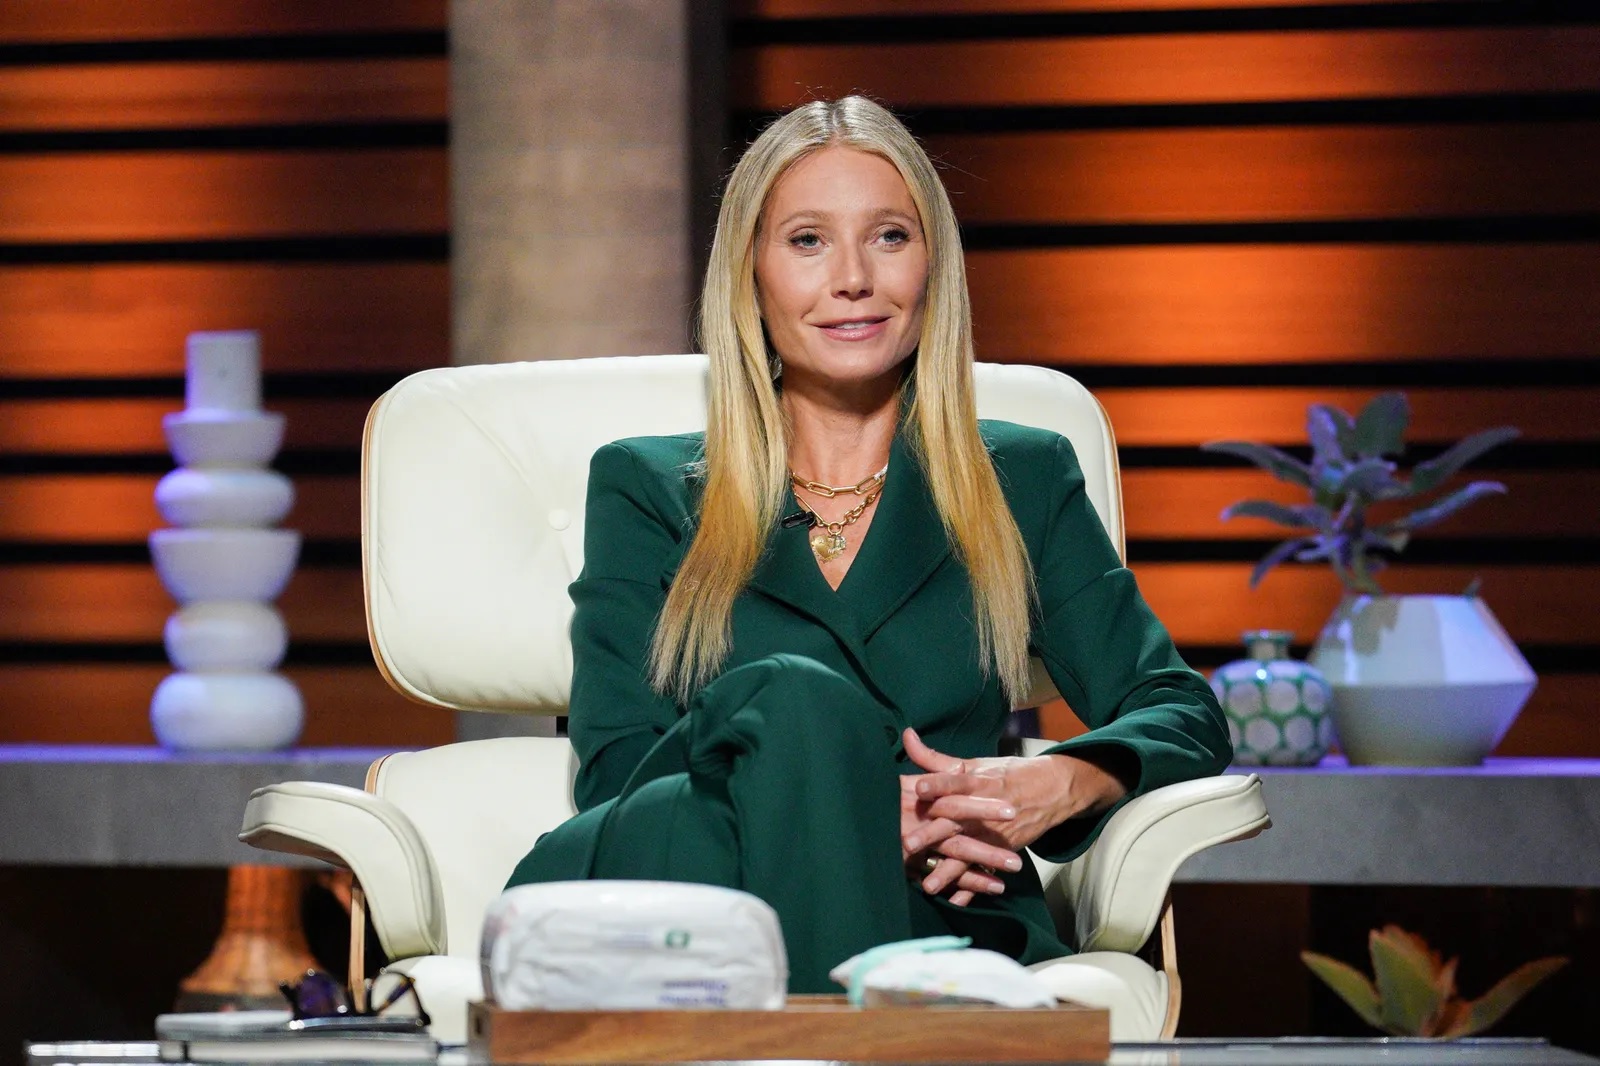 Gwyneth Paltrow Disappear for Good Her Surprising Exit Plan Revealed